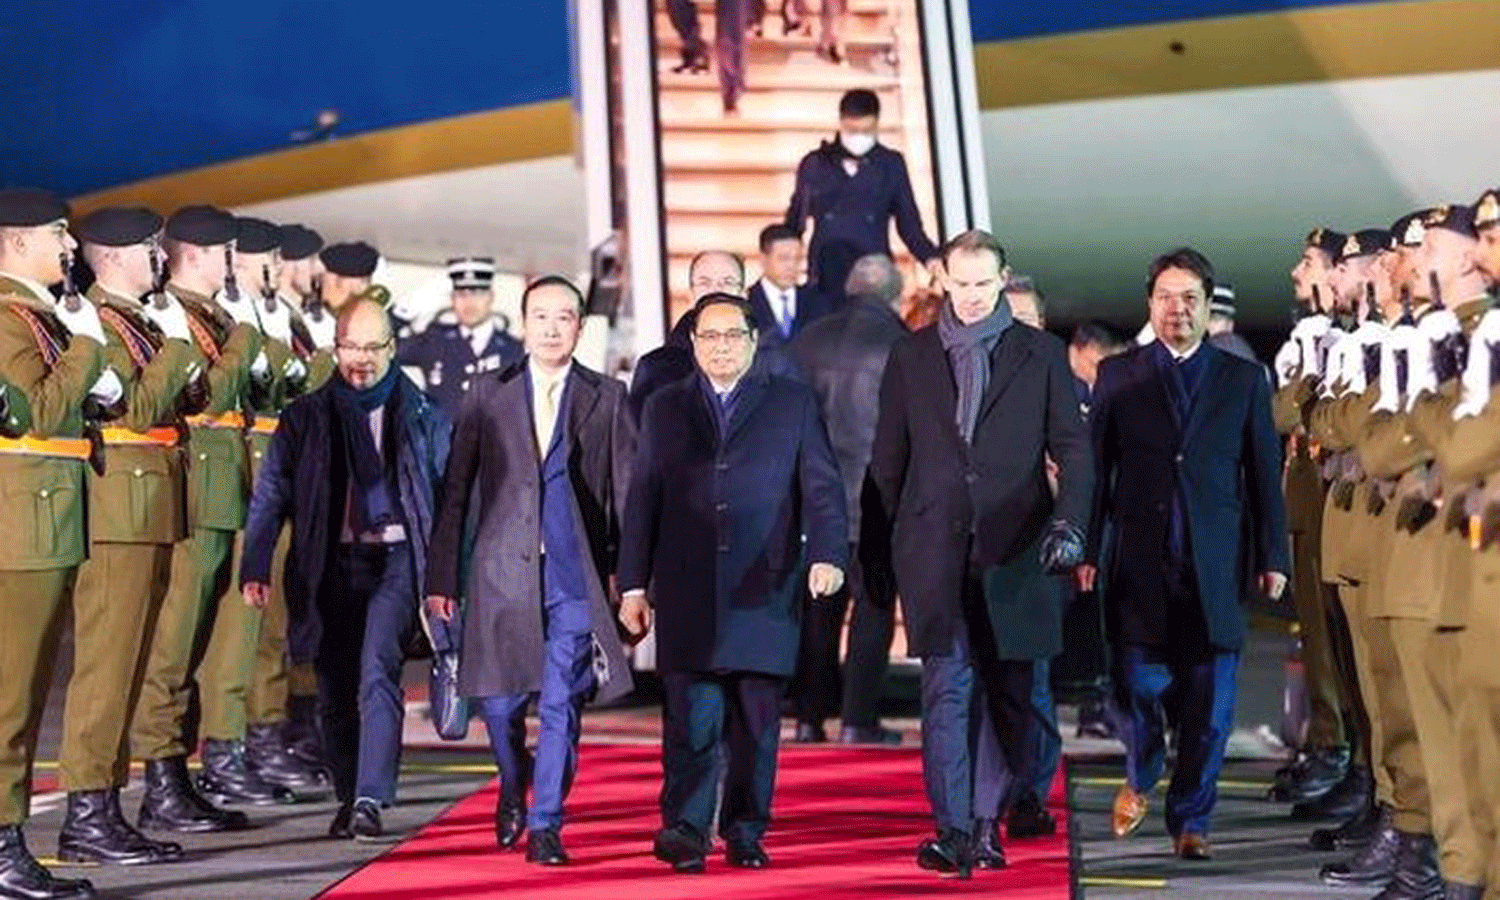 PM Pham Minh Chinh and the Vietnamese delegation welcomed at the Luxembourg-Findel International Airport on December 9 morning. (Photo: VGP).